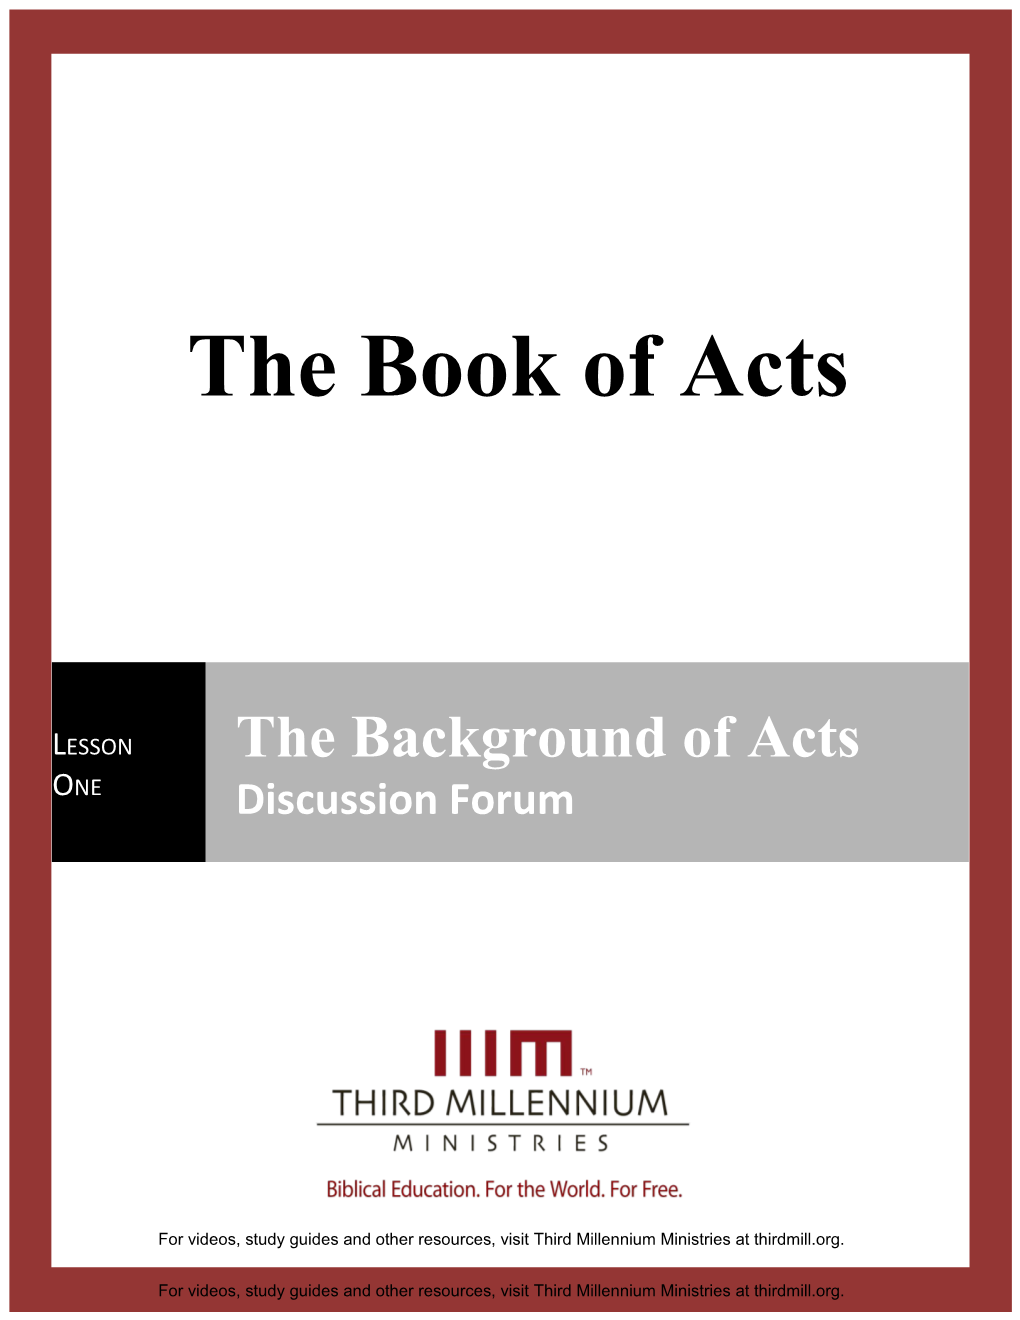 The Book of Acts, Lesson 1 Discussion Forum